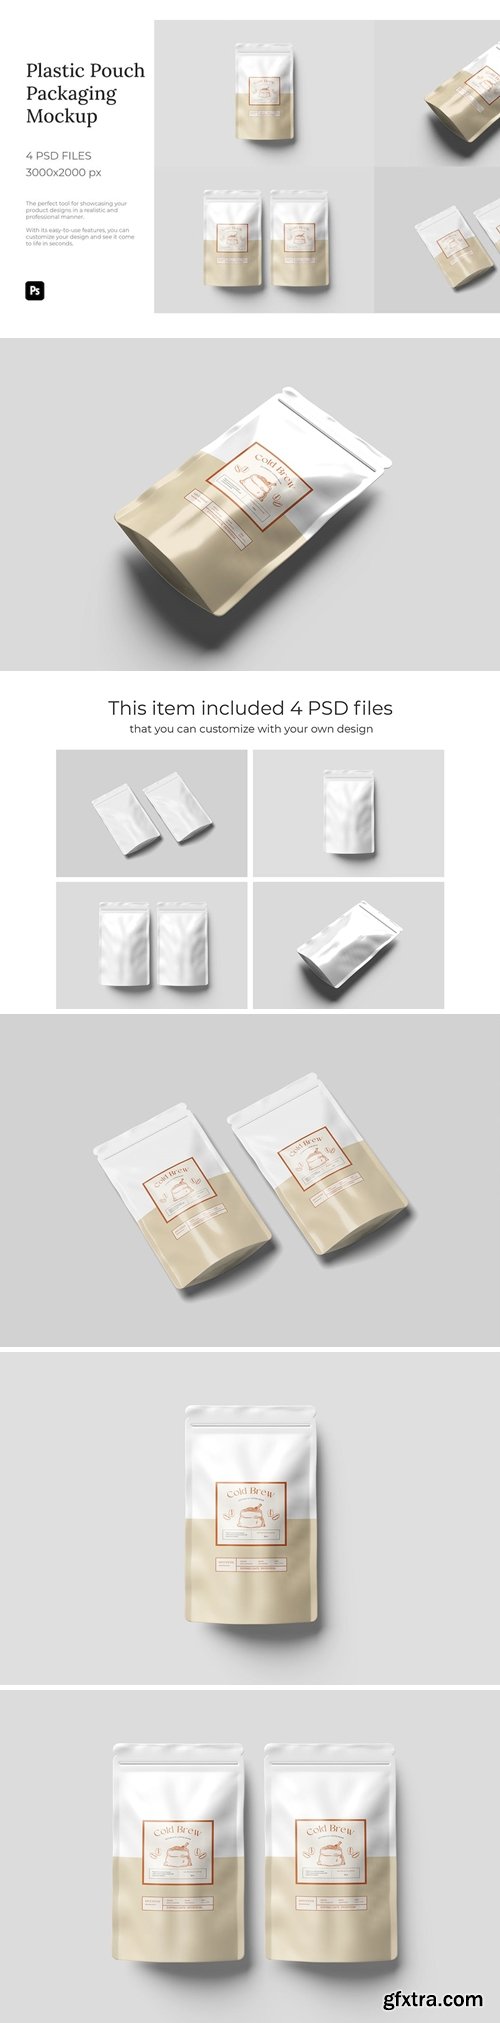 Plastic Pouch Packaging Mockup SJZH6PD